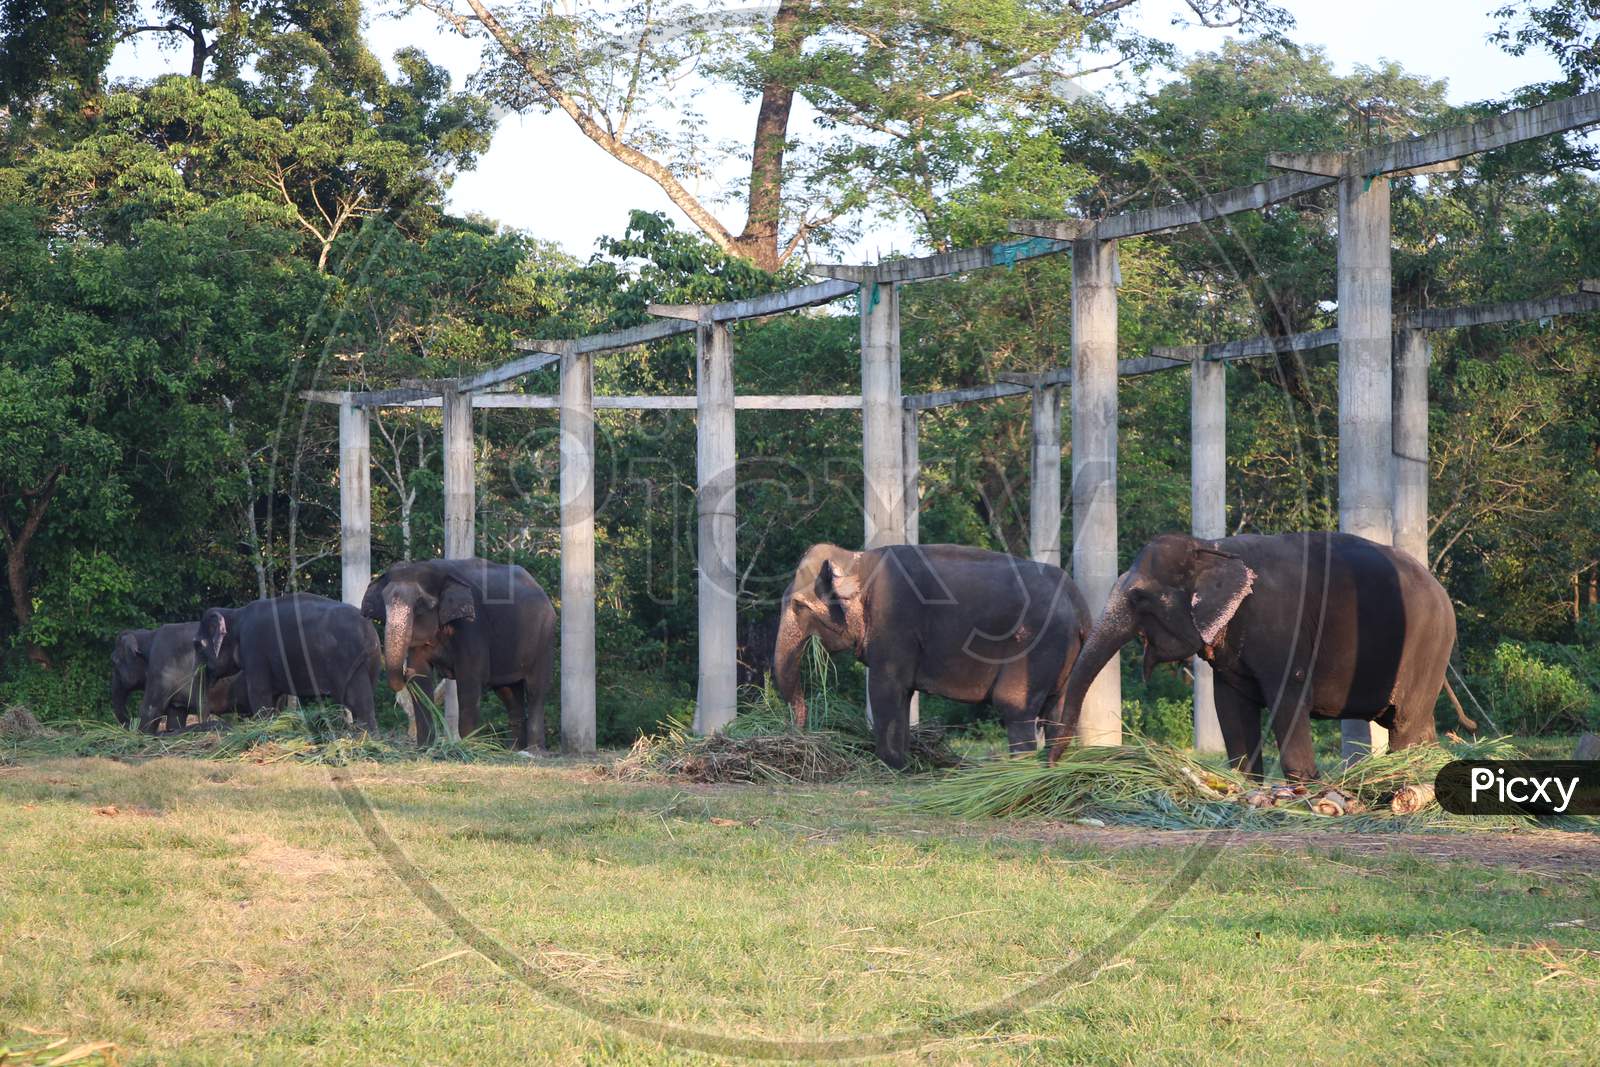 Elephants eating grass in a Zoo